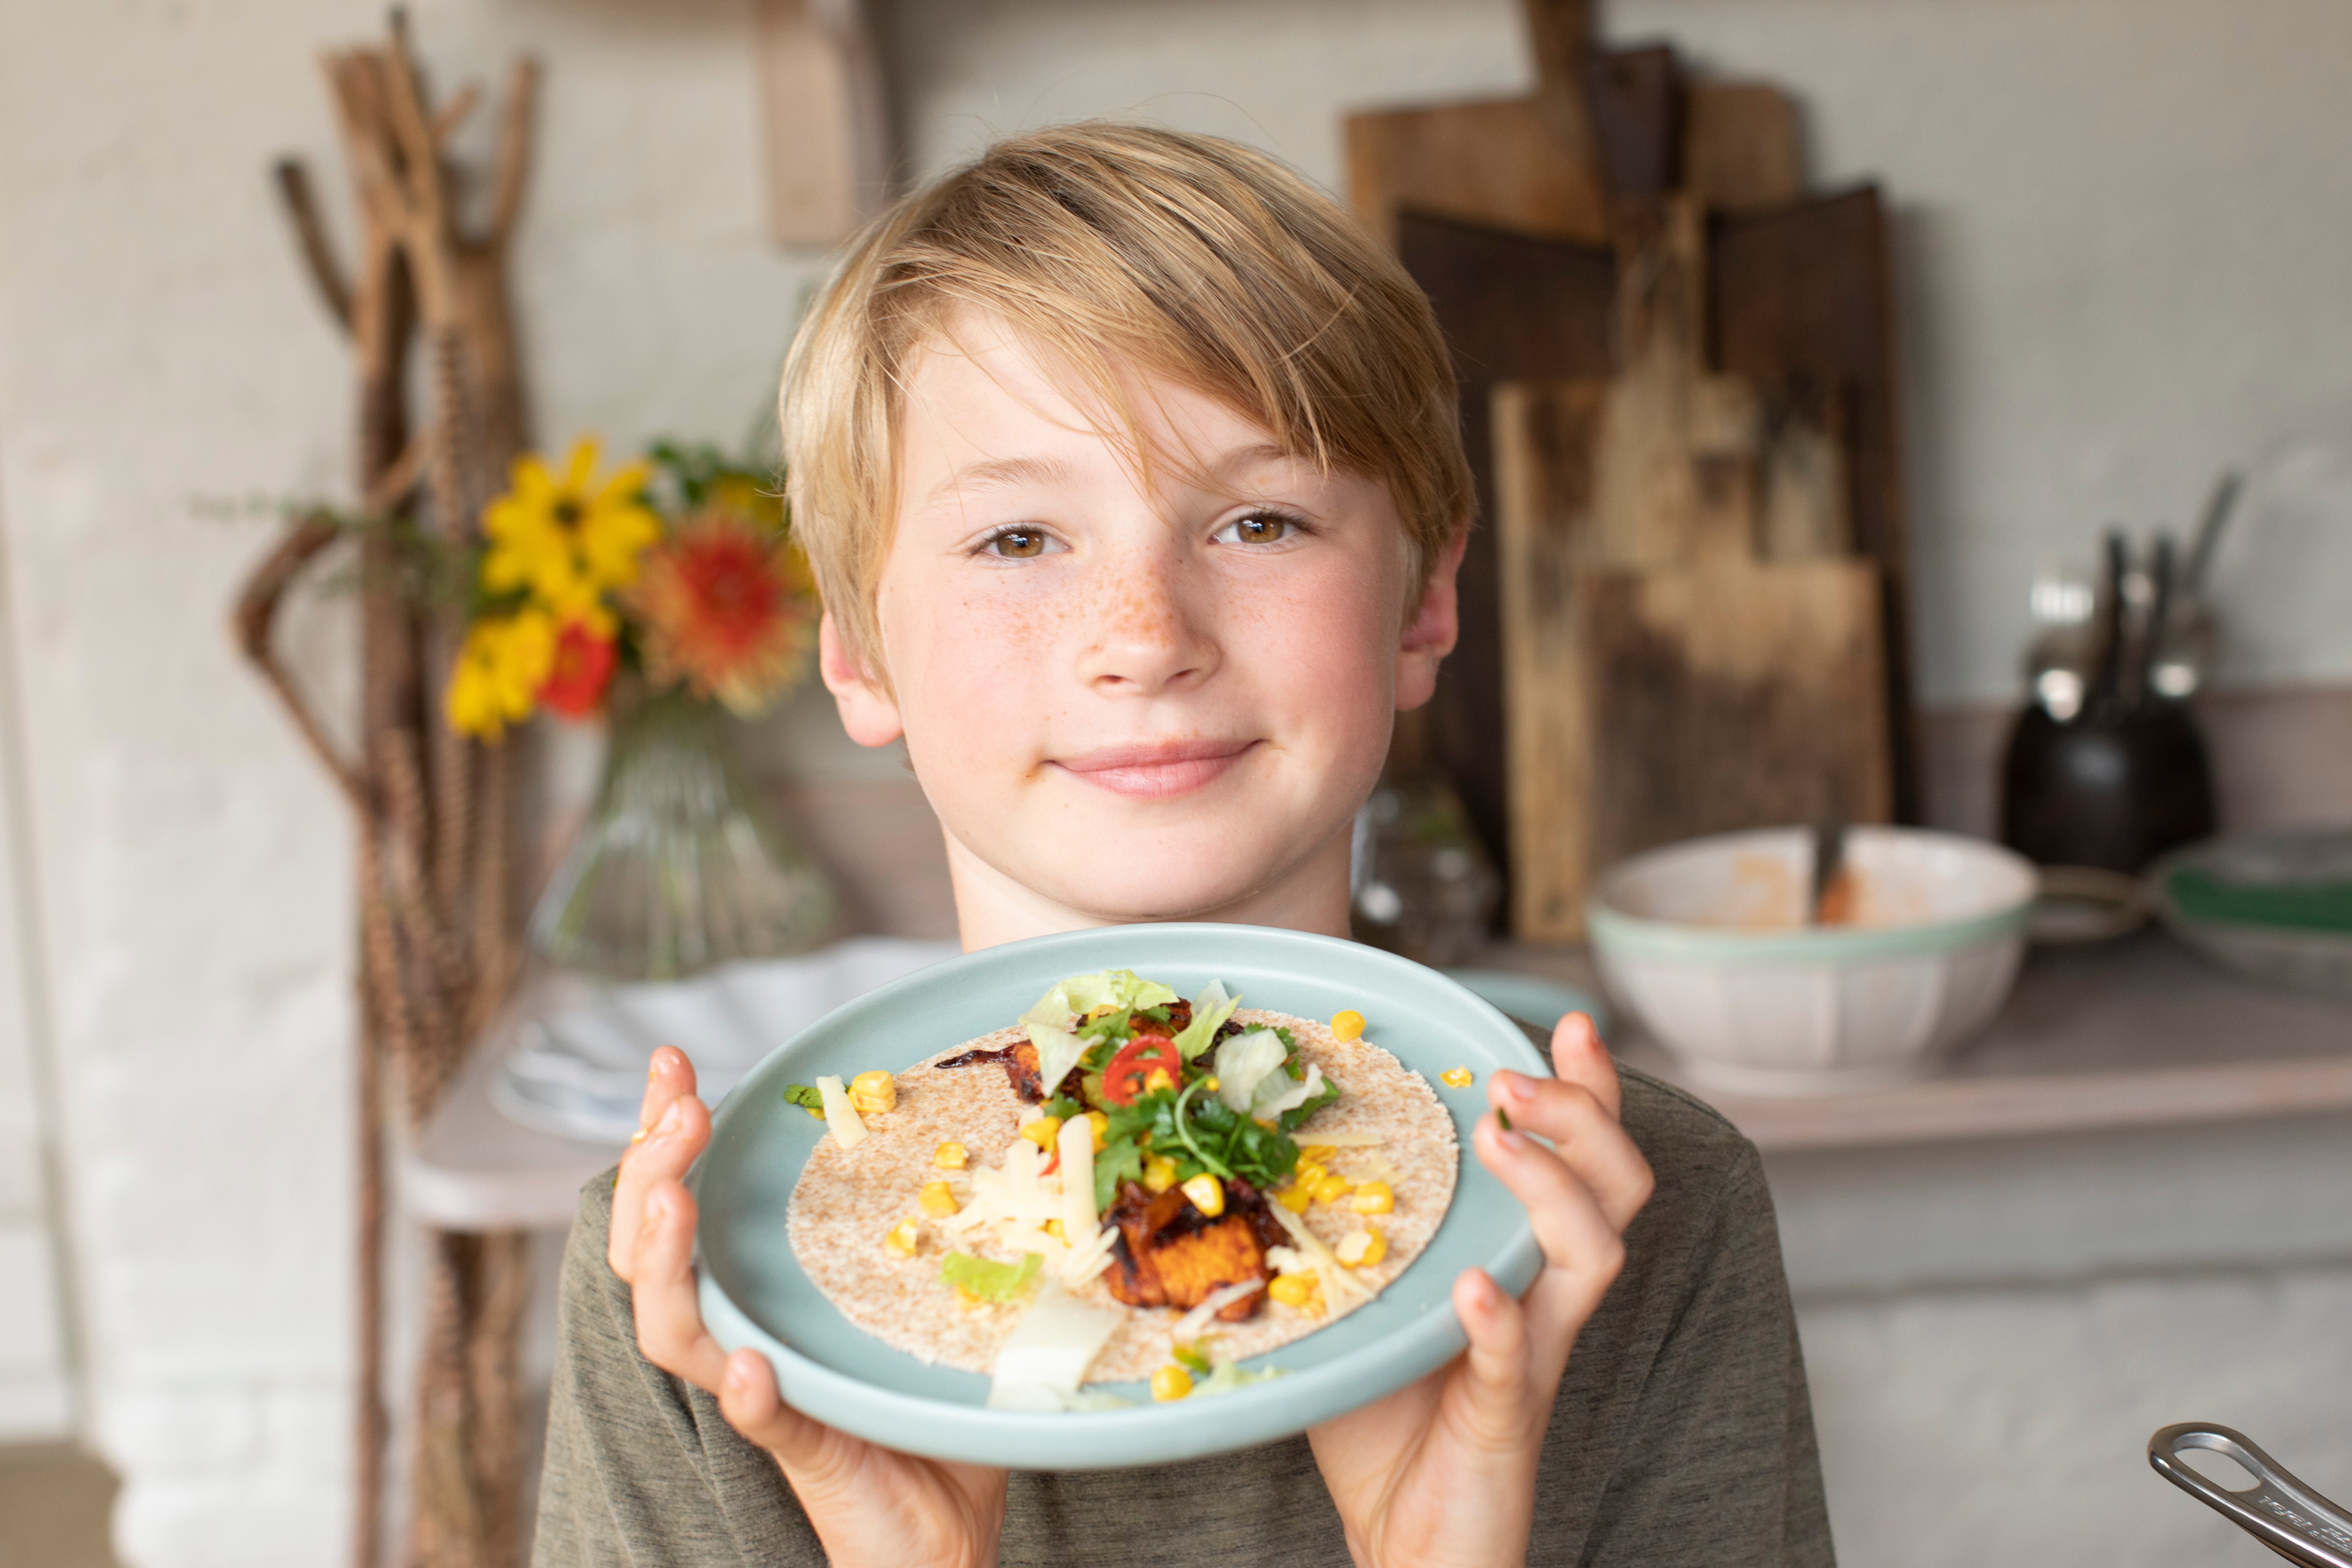 Jamie Oliver's 12-year-old son Buddy lands own BBC cooking show after chef  rejects 'nepo baby' suggestion